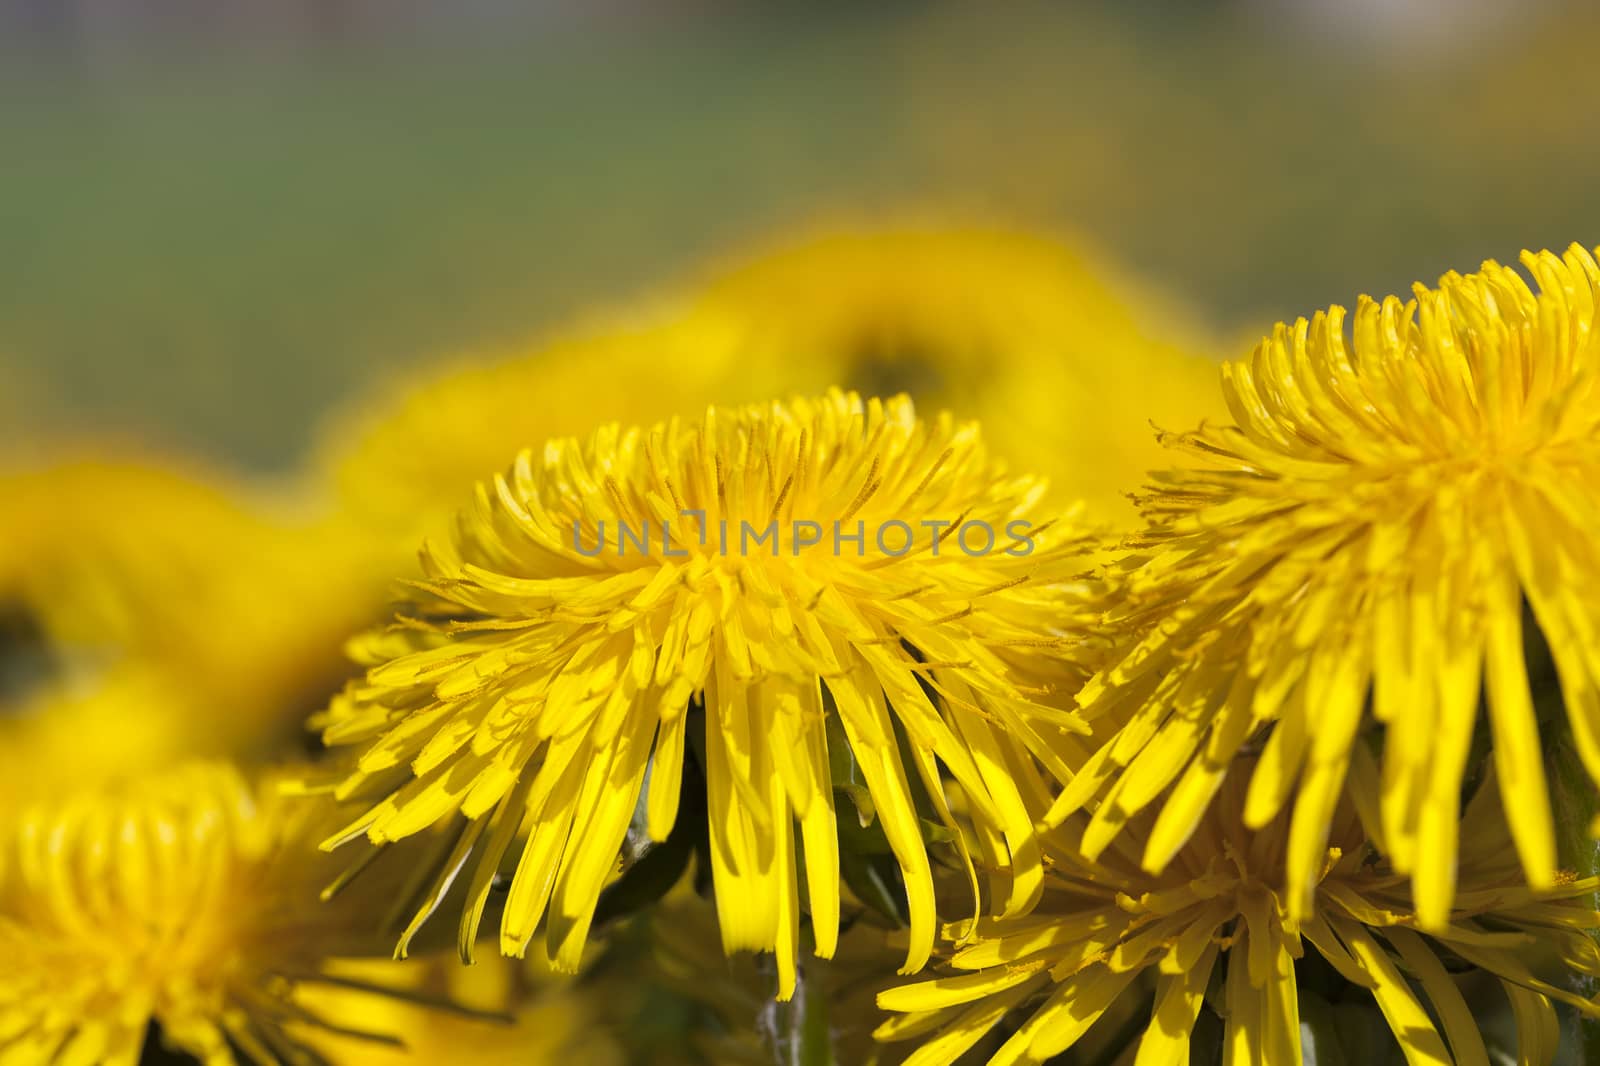 photographed close-up of yellow dandelions in springtime, shallow depth of field